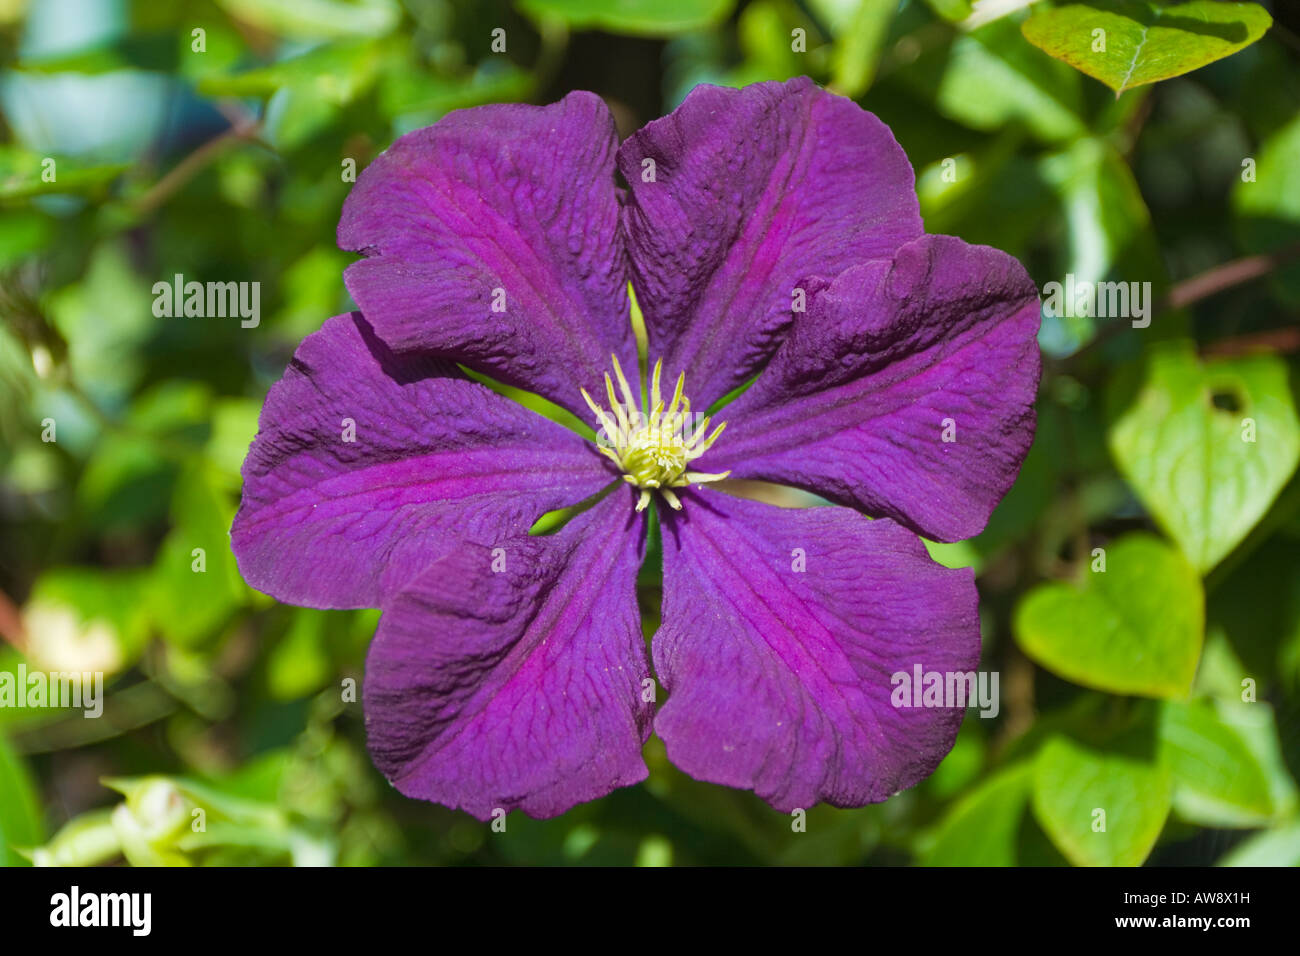 Close-up of a Purple Flowering Clematis Stock Photo